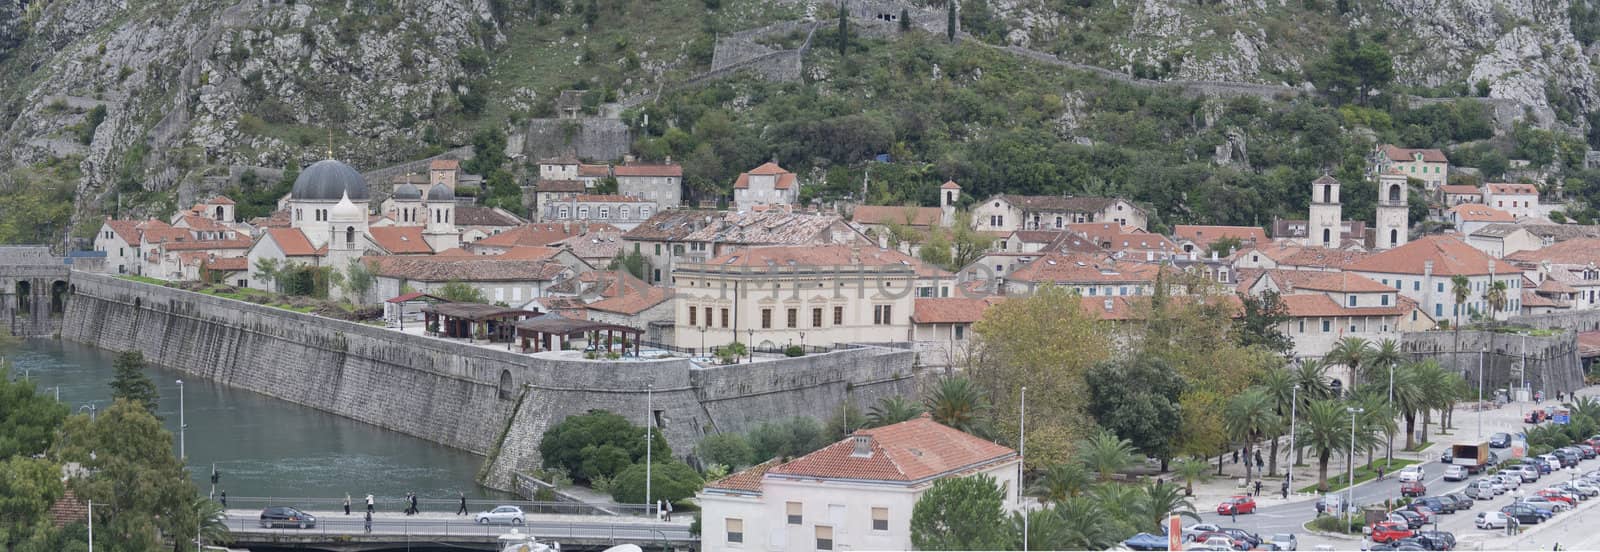 Orthodox church within the city walls. The Old City of Kotor is a well preserved urbanisation typical of the Middle Ages, built between the 12th and 14th century.